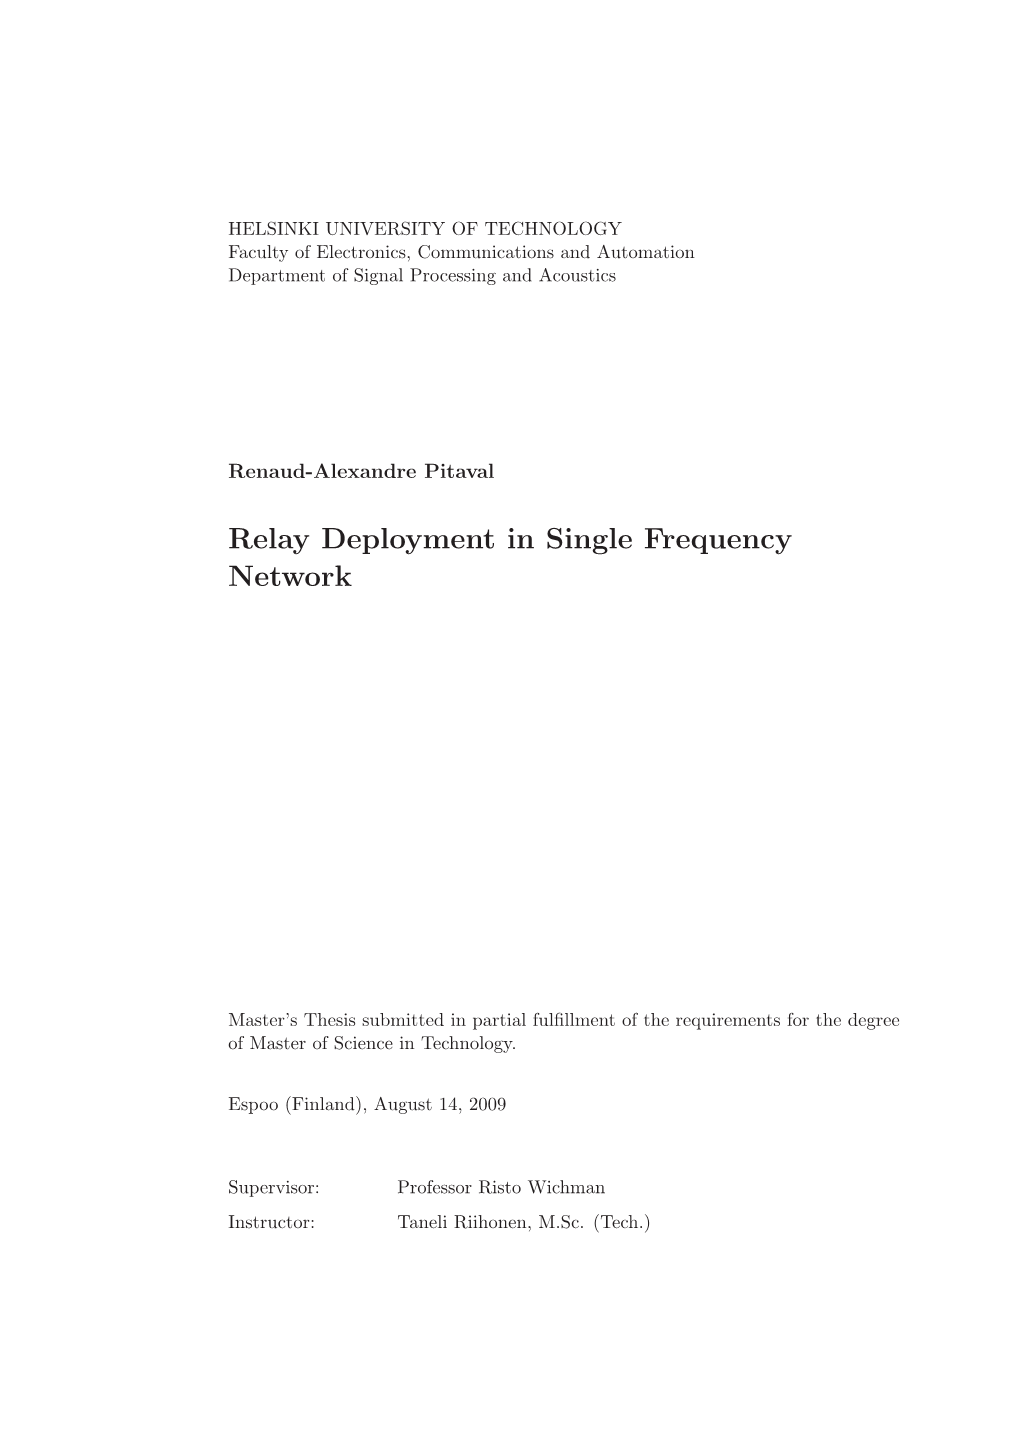 Relay Deployment in Single Frequency Network